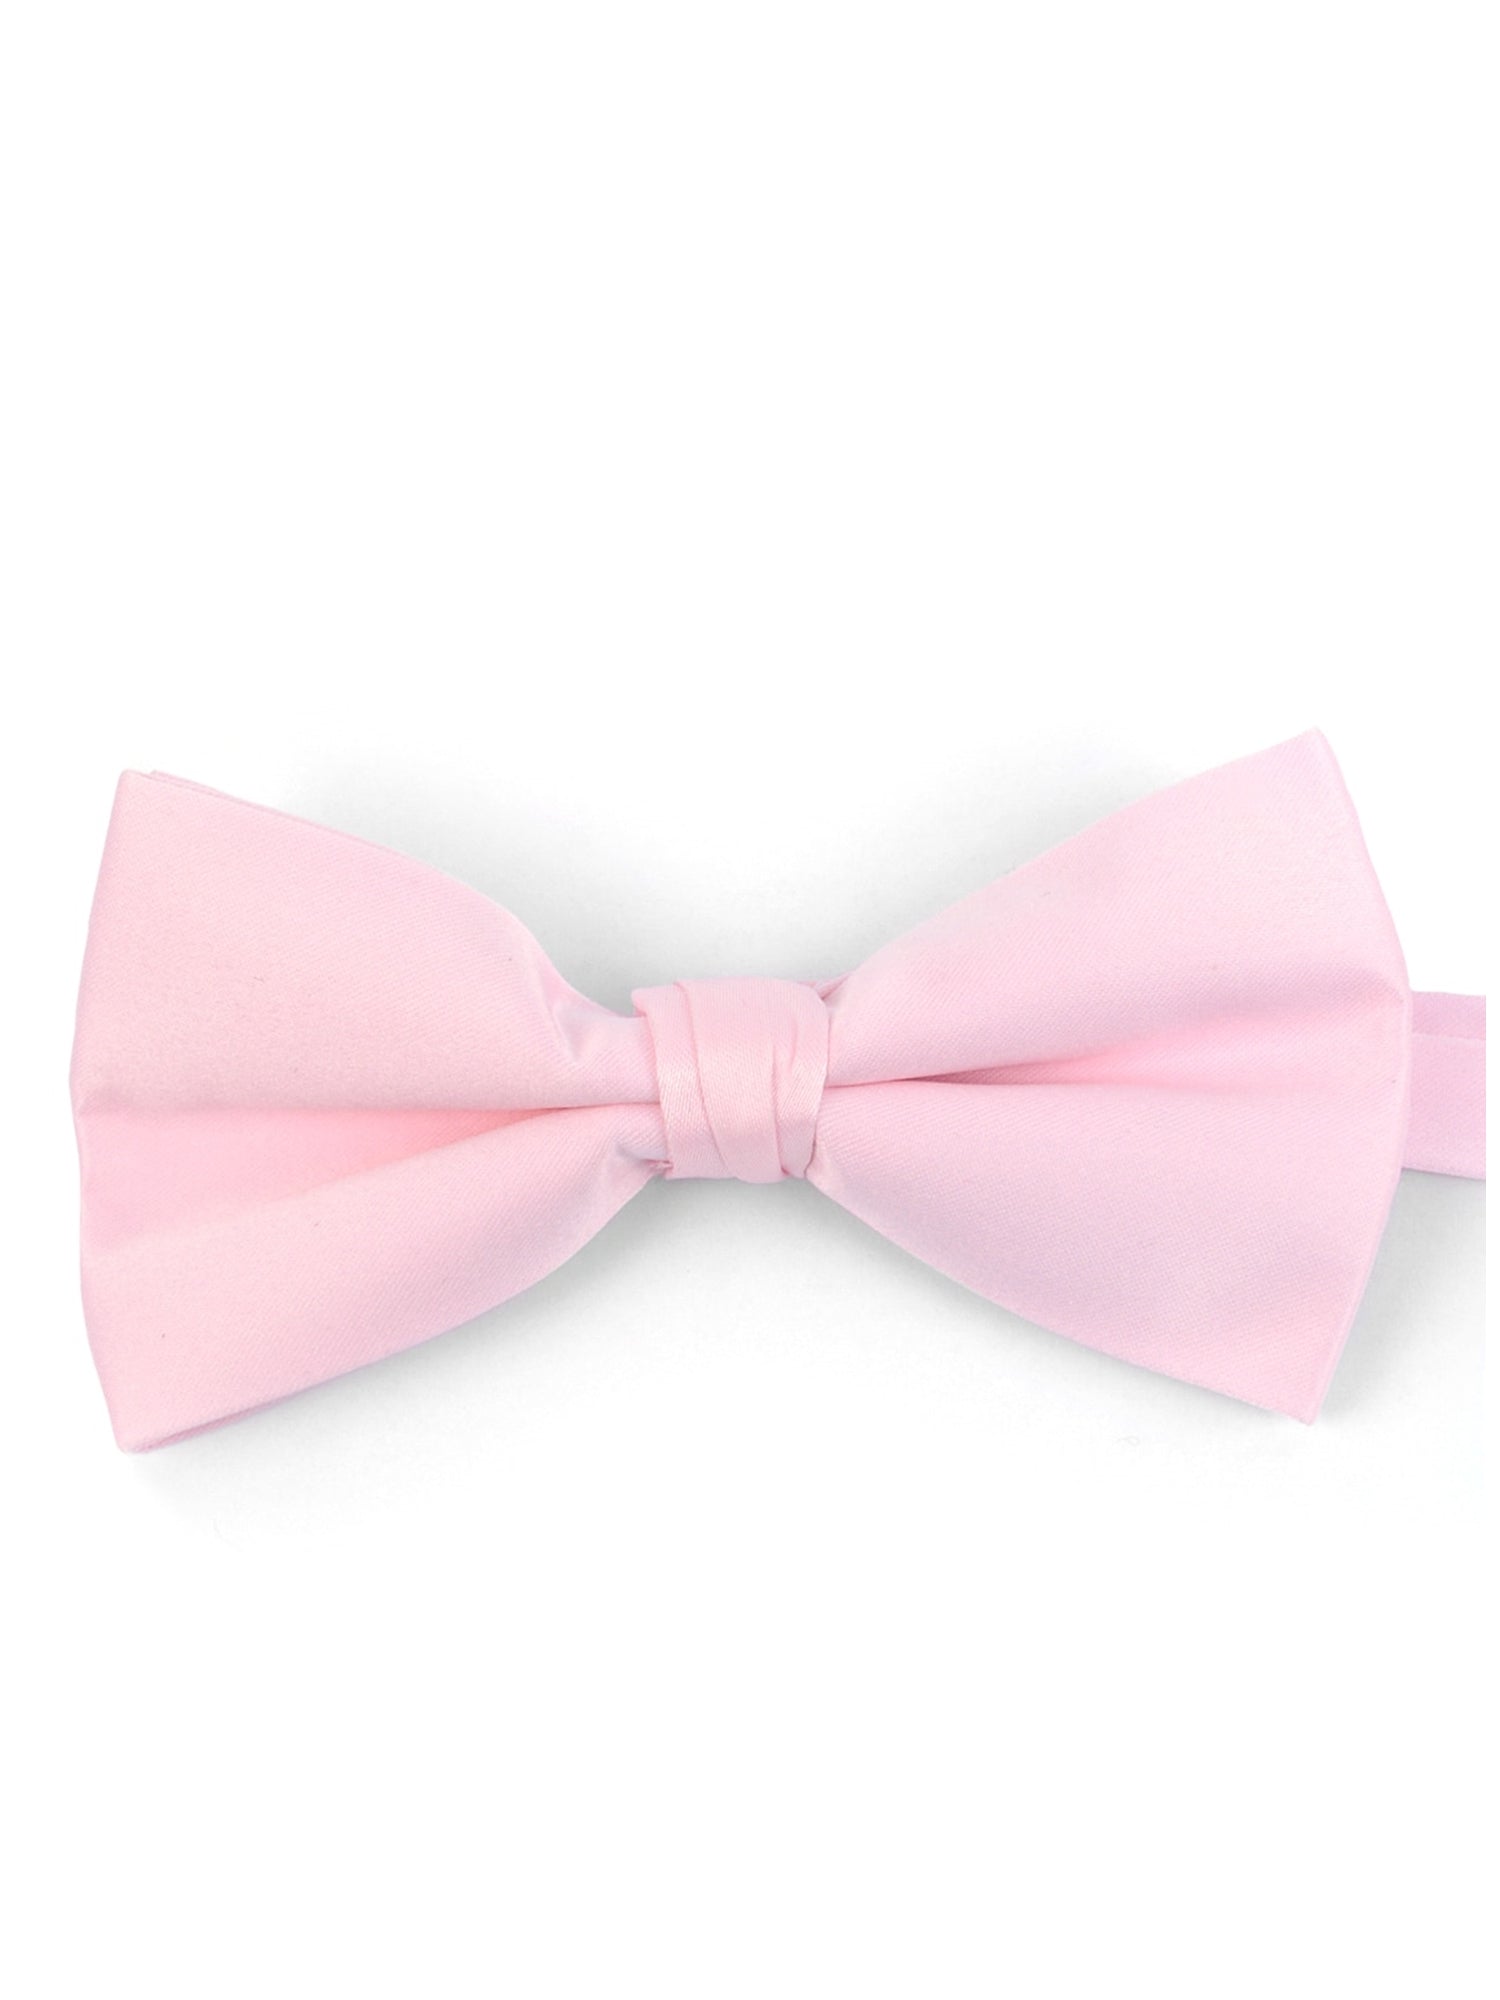 Men's Pre-tied Adjustable Length Bow Tie - Formal Tuxedo Solid Color Men's Solid Color Bow Tie TheDapperTie Light Pink One Size 